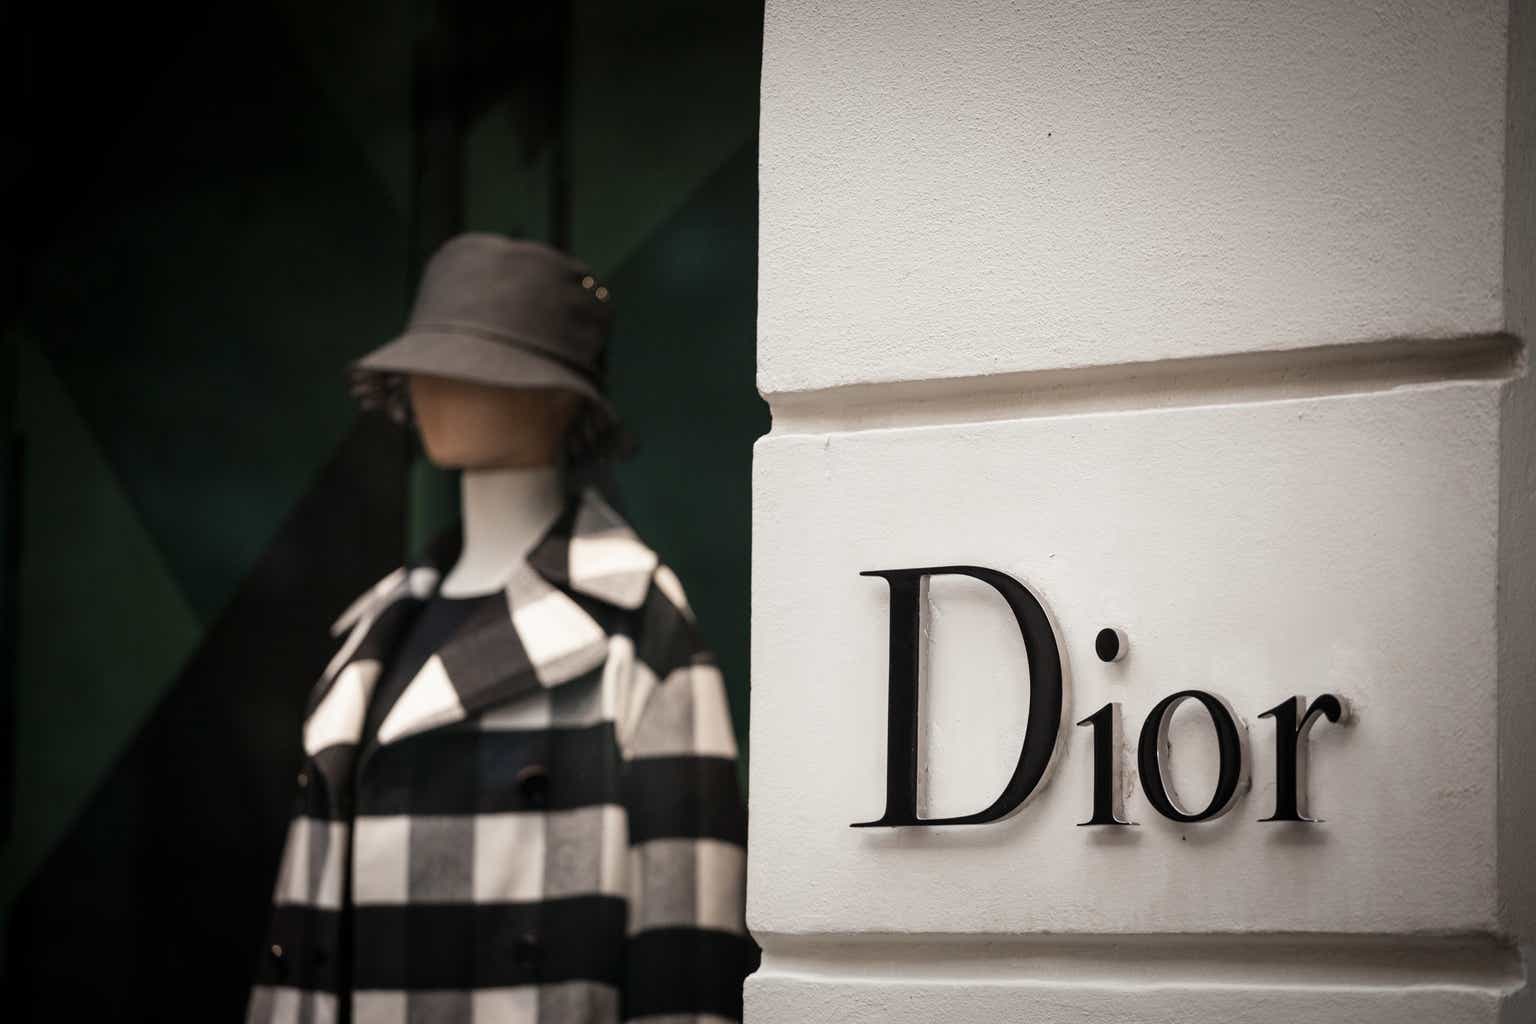 LVMH Buys Christian Dior For $7 Billion - LVMH Bought Christian Dior Couture